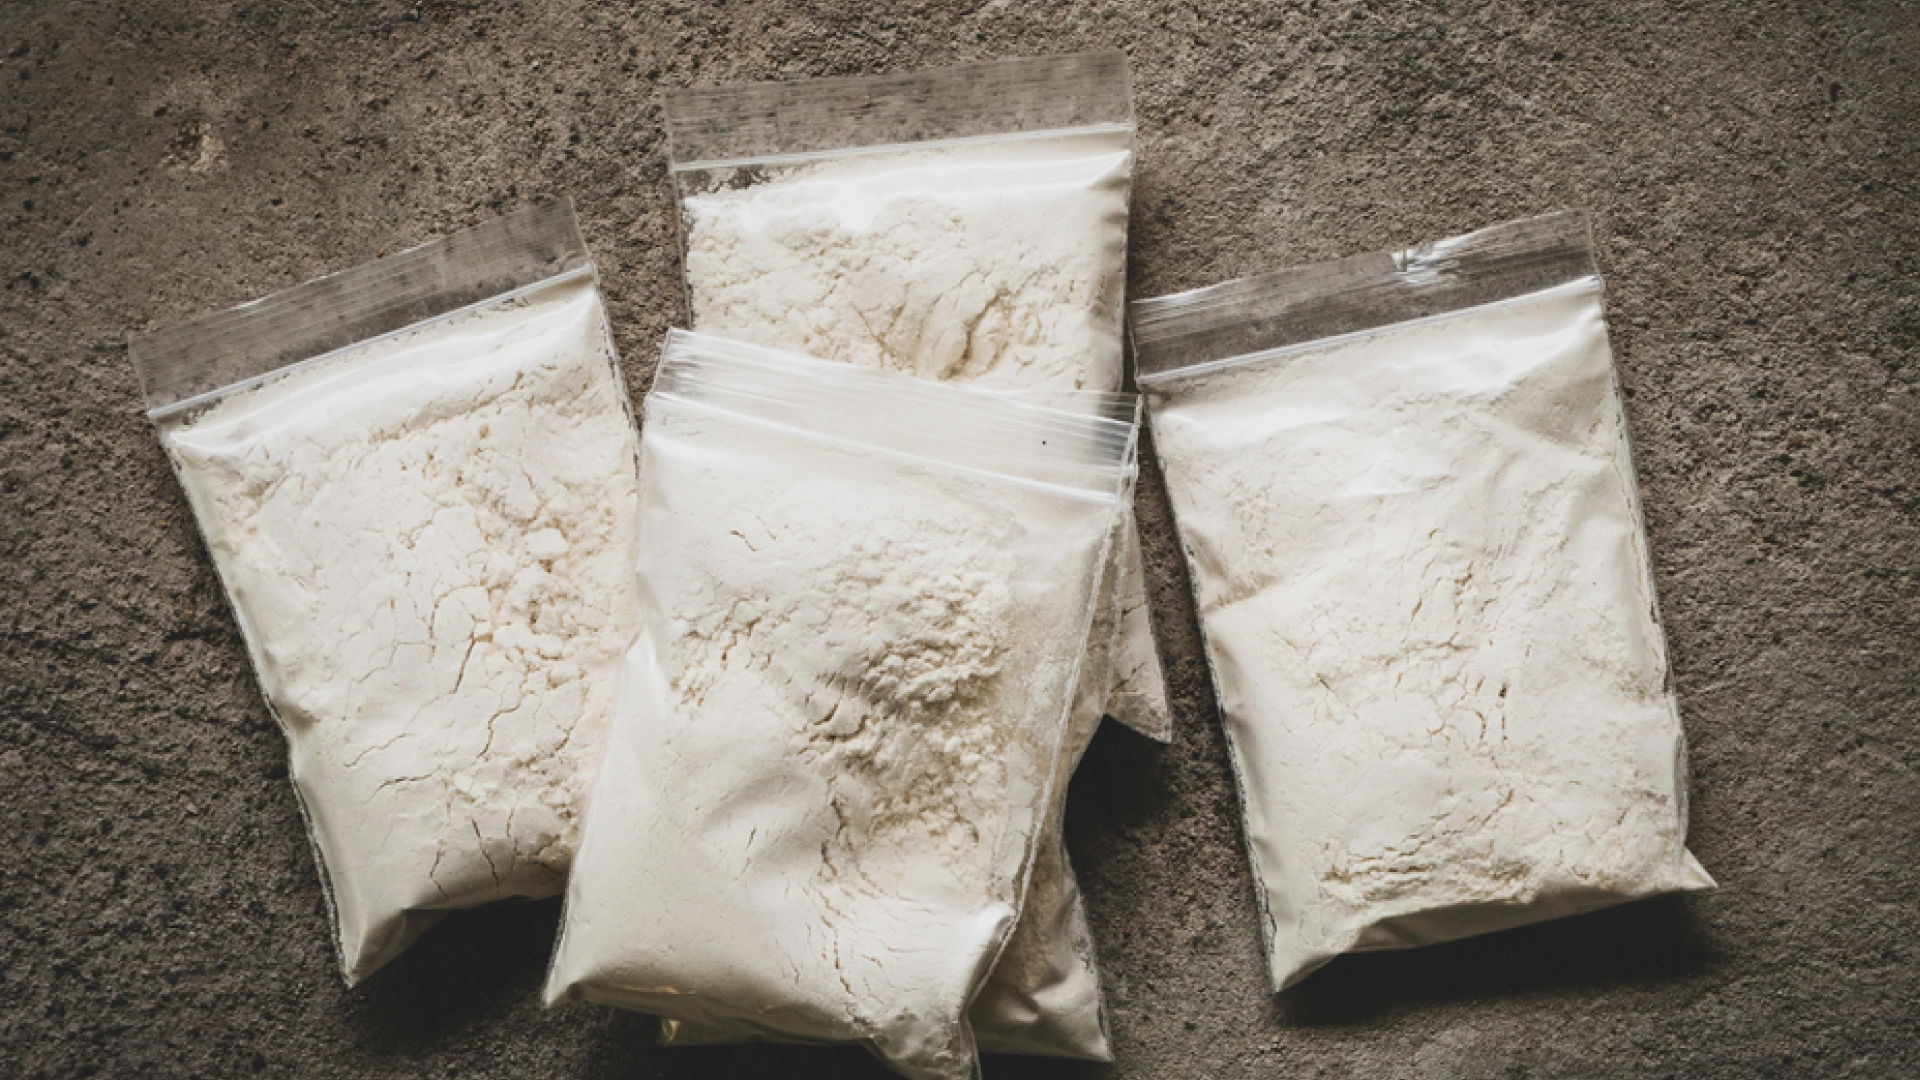 Bags of white powder stacked on top of each other.